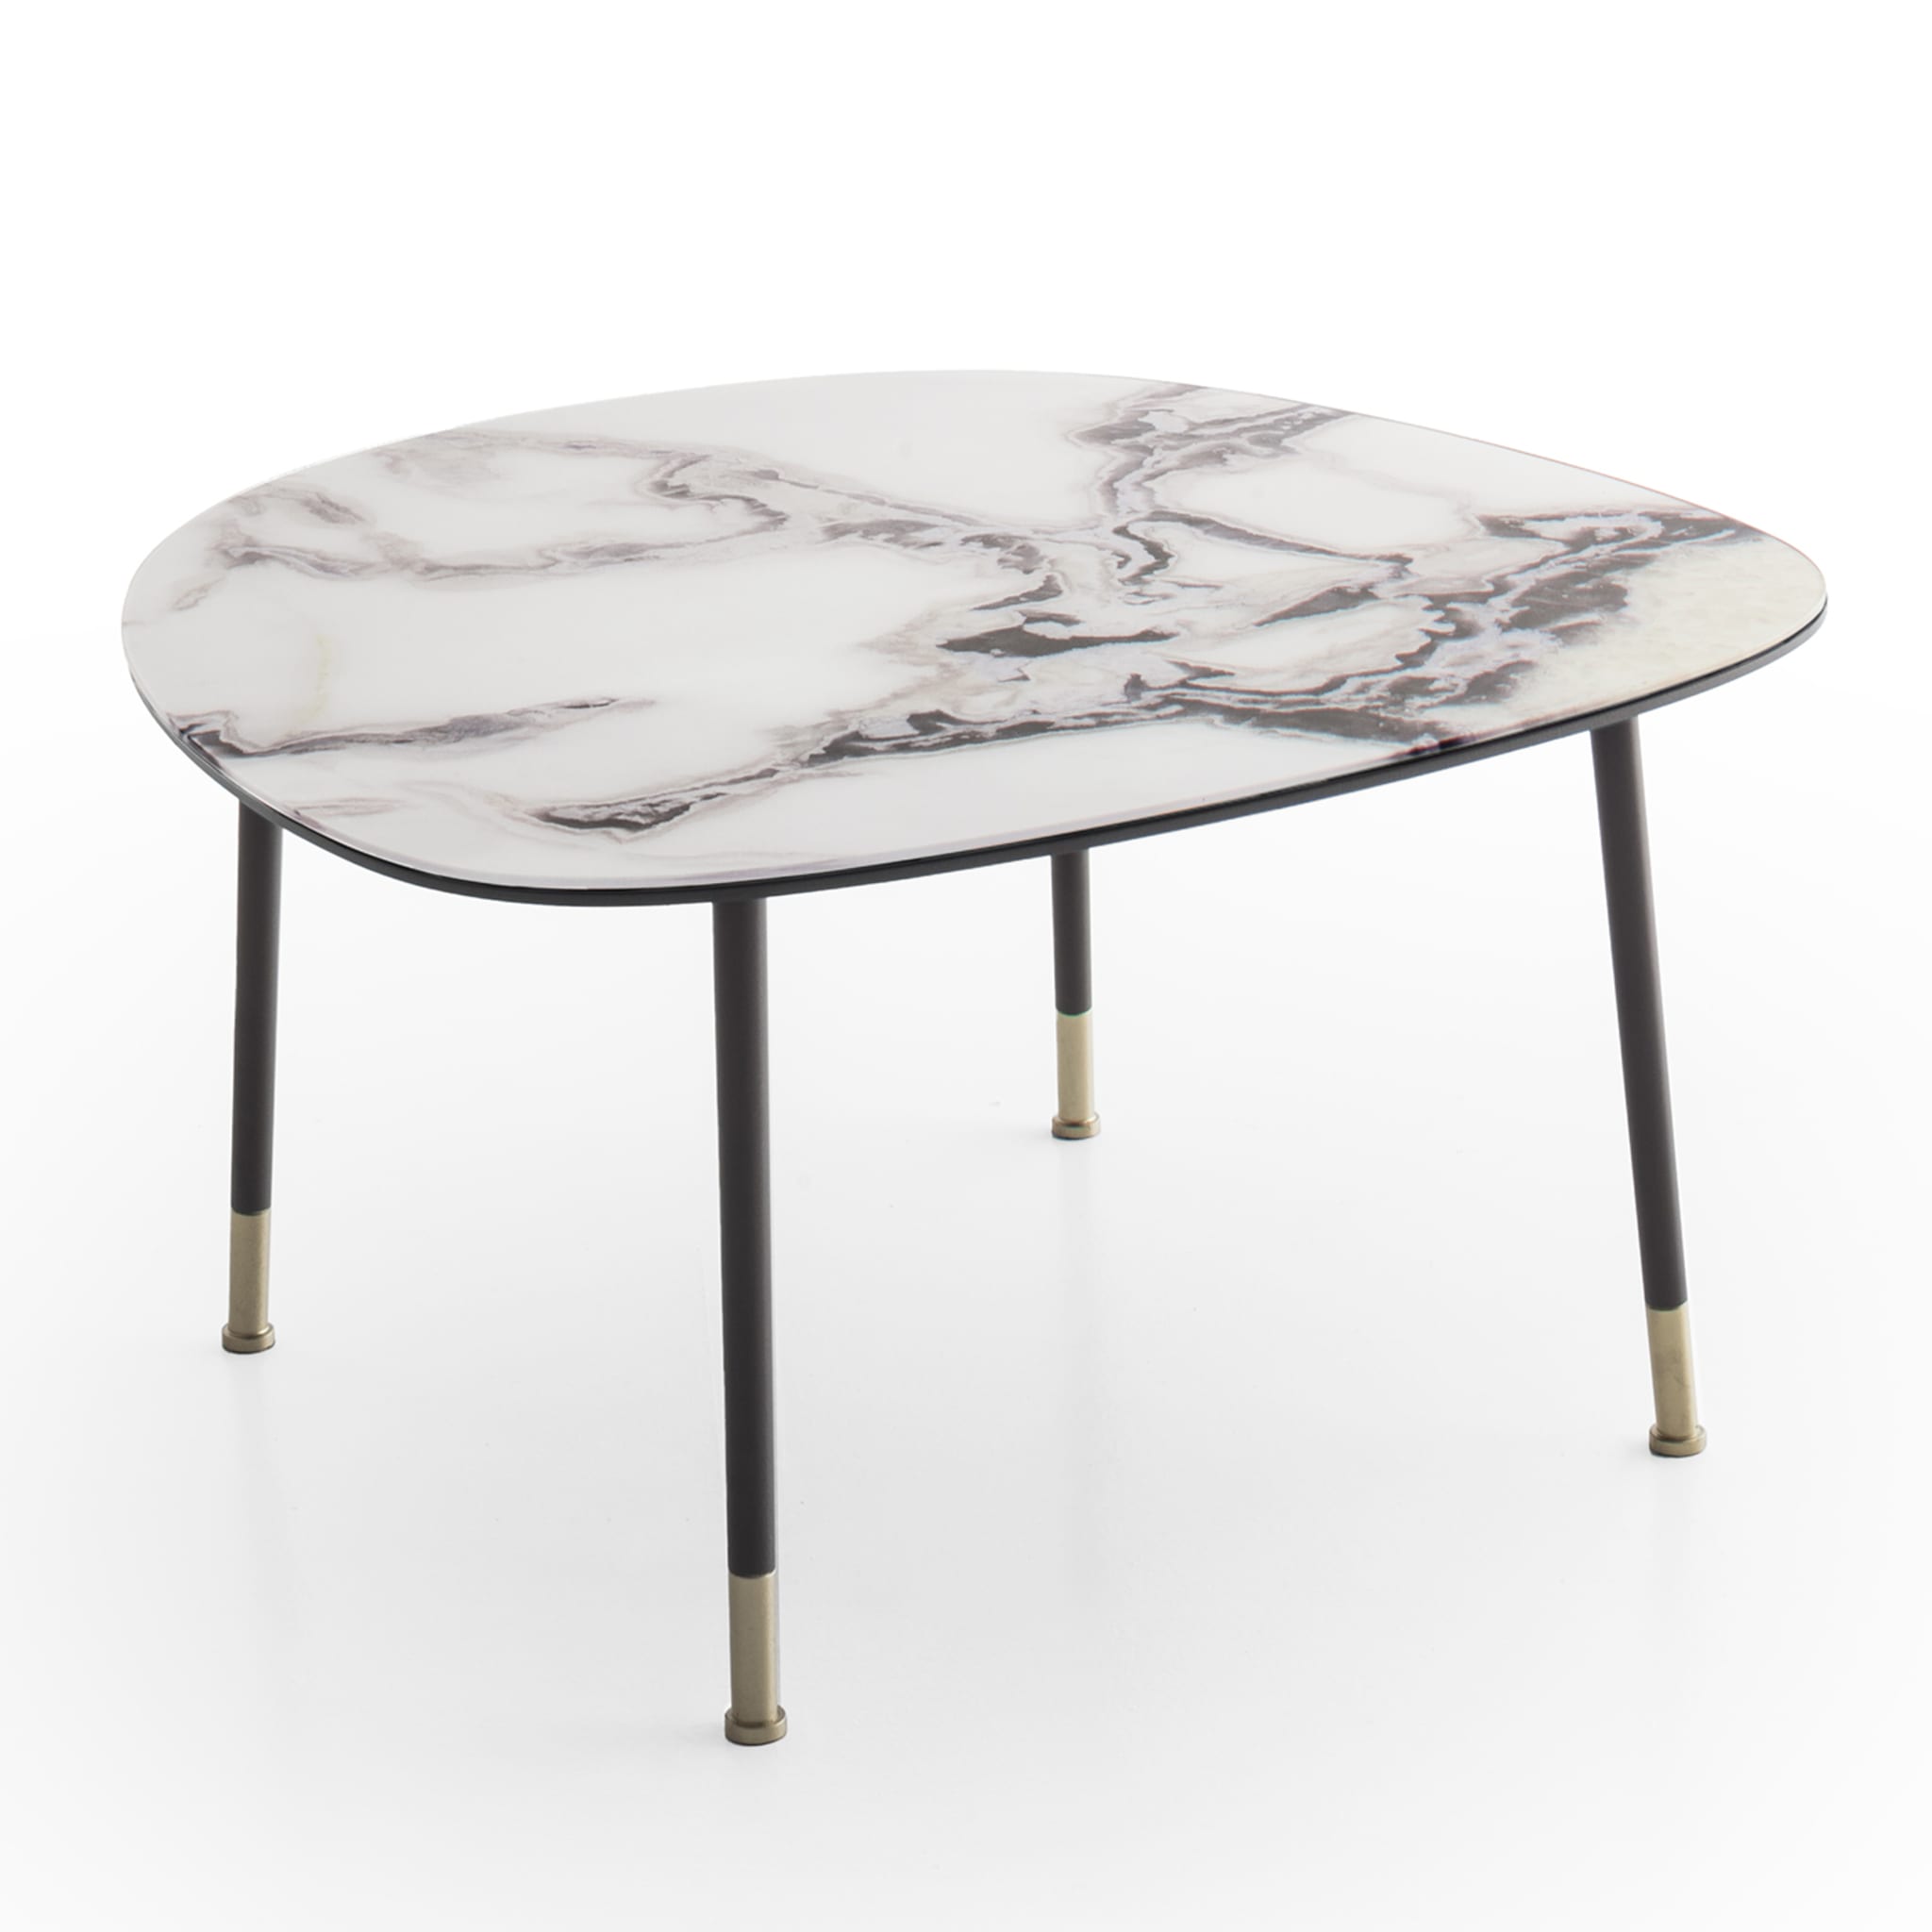 Pebble Large Trinity White Marble-Effect Coffee Table - Alternative view 2